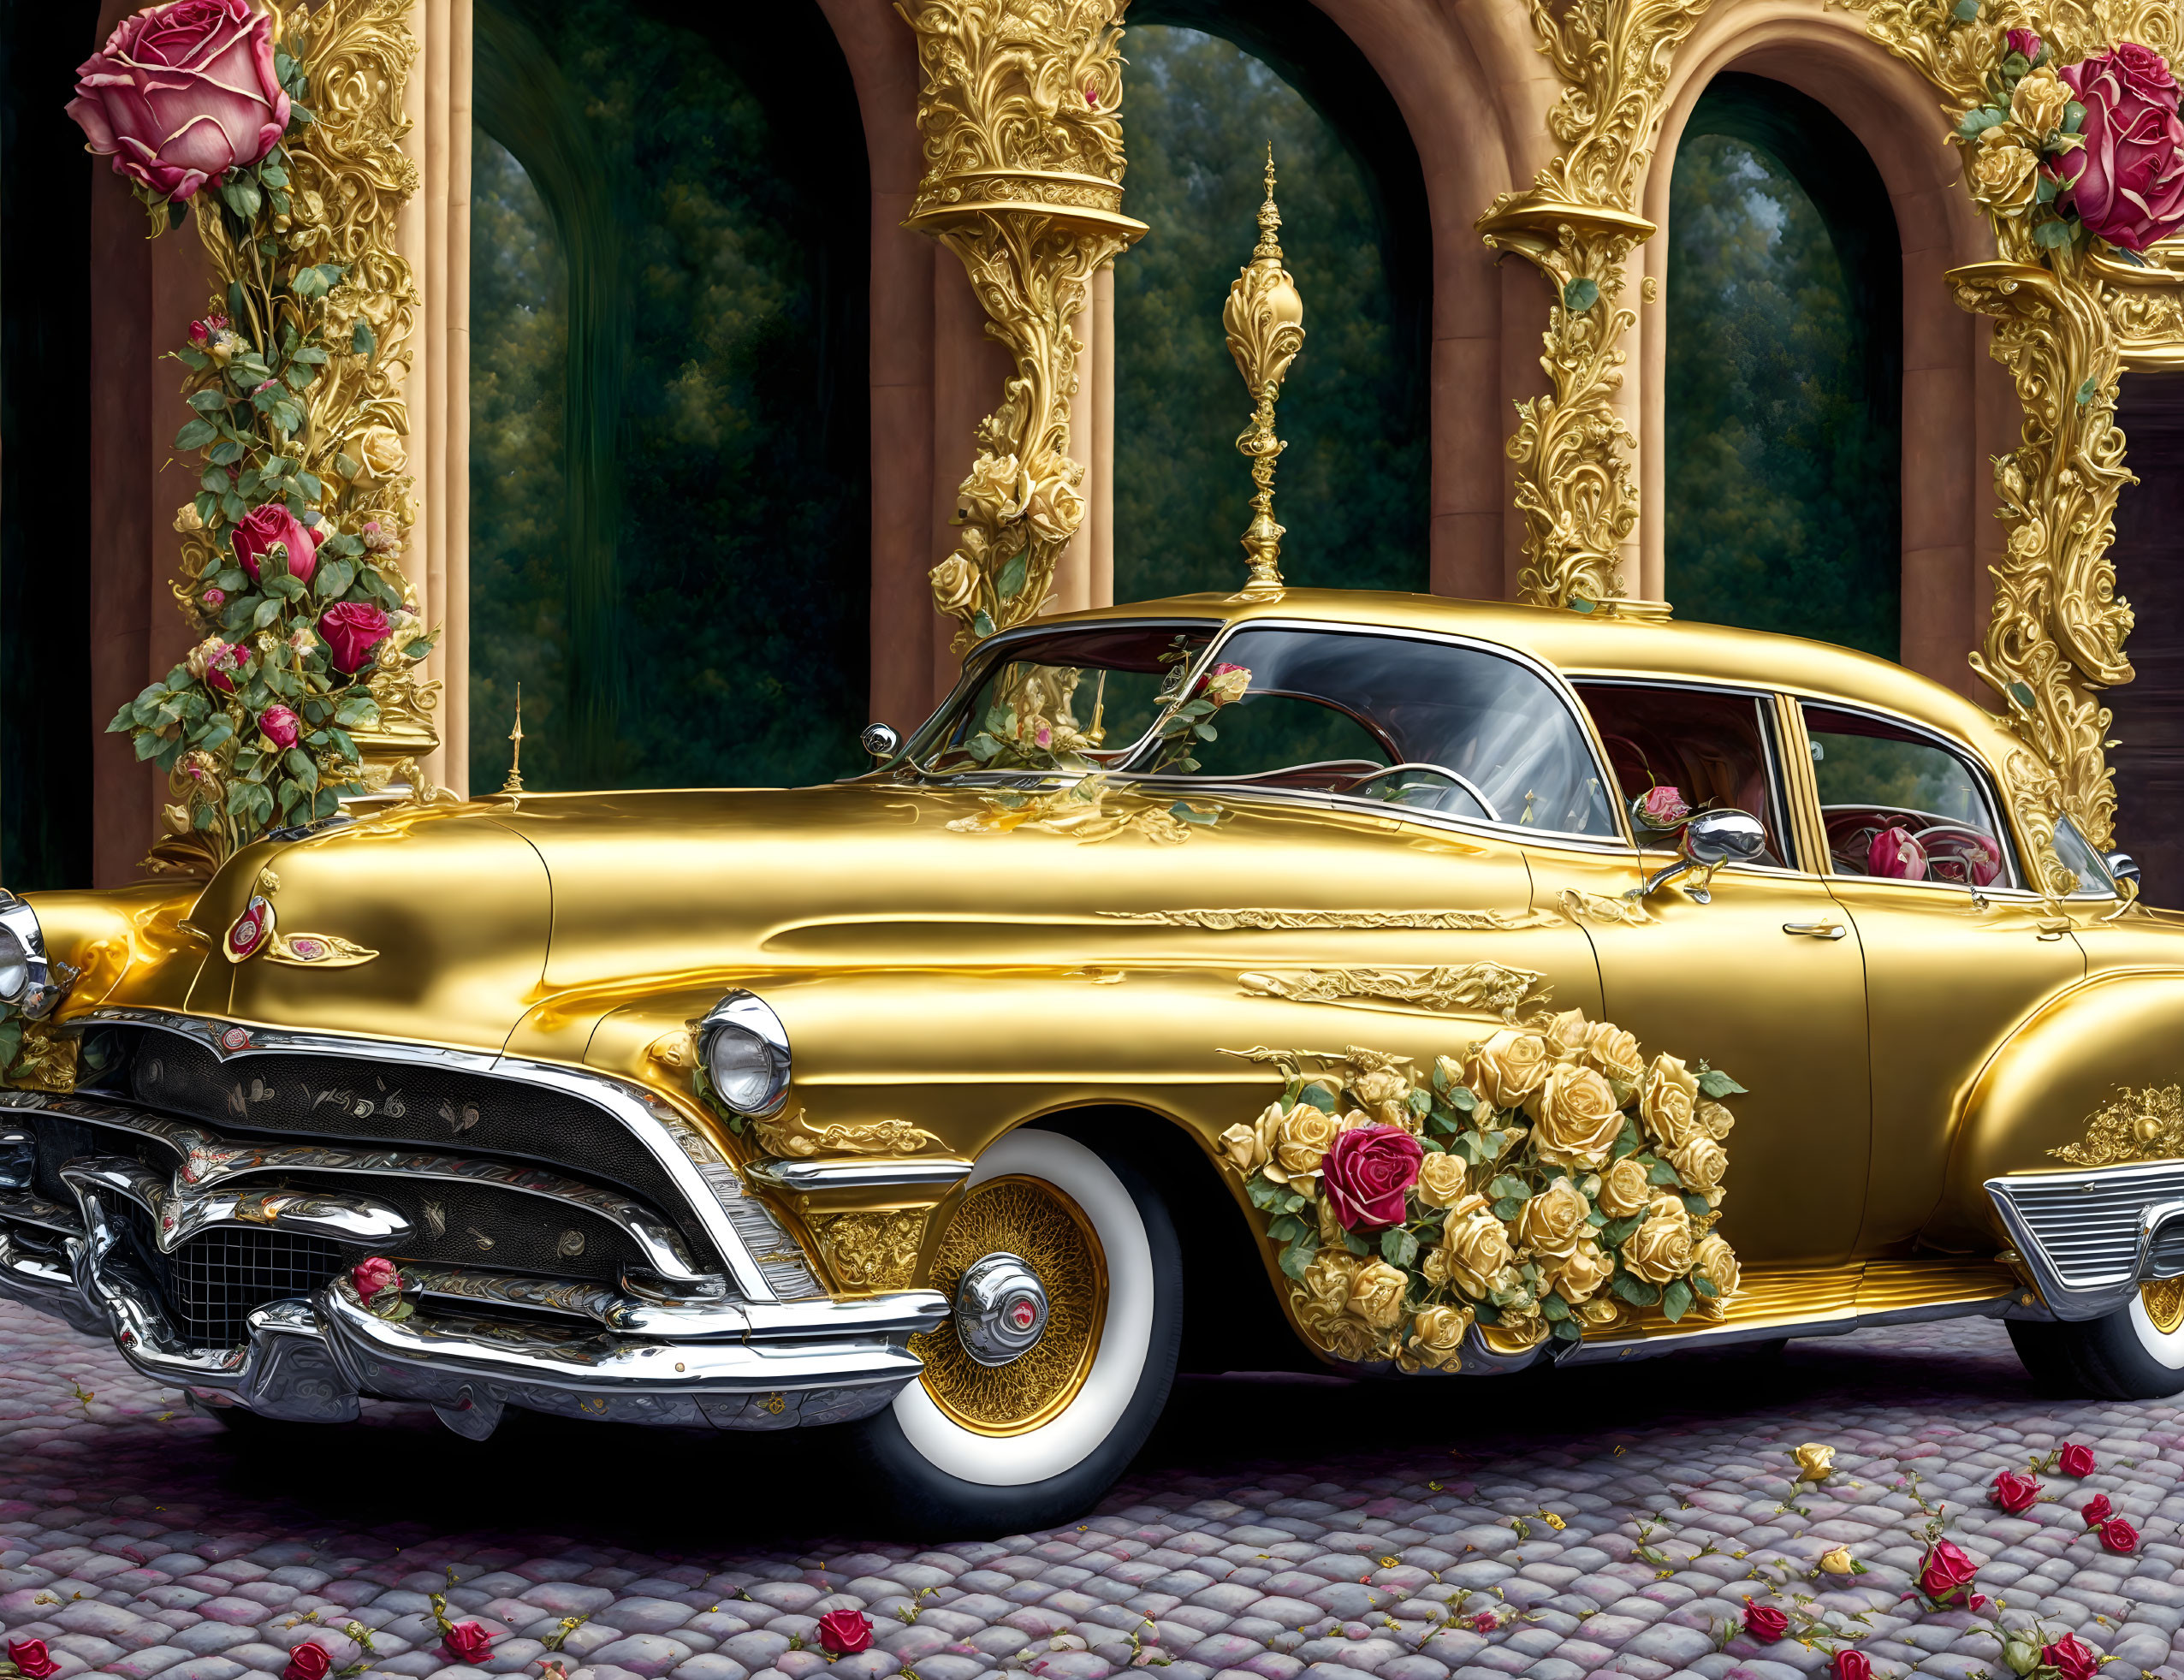 Vintage golden car with rose decorations parked in front of ornate building